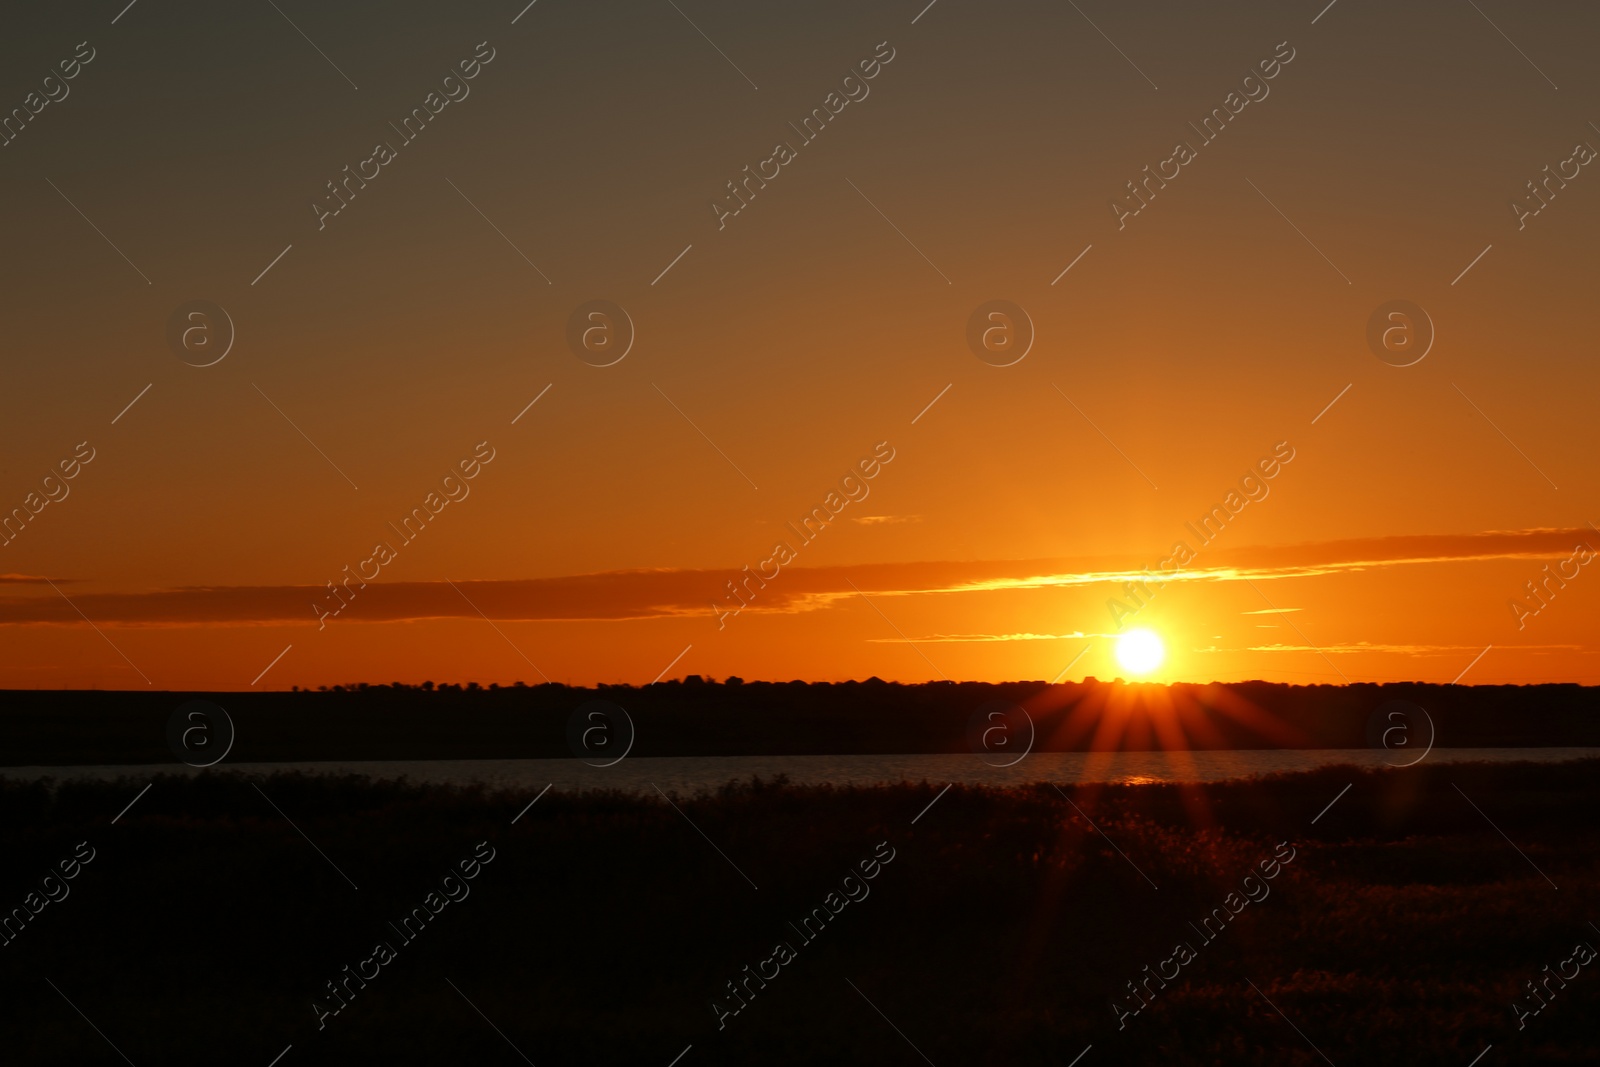 Photo of Picturesque view of beautiful sunrise on riverside. Morning sky